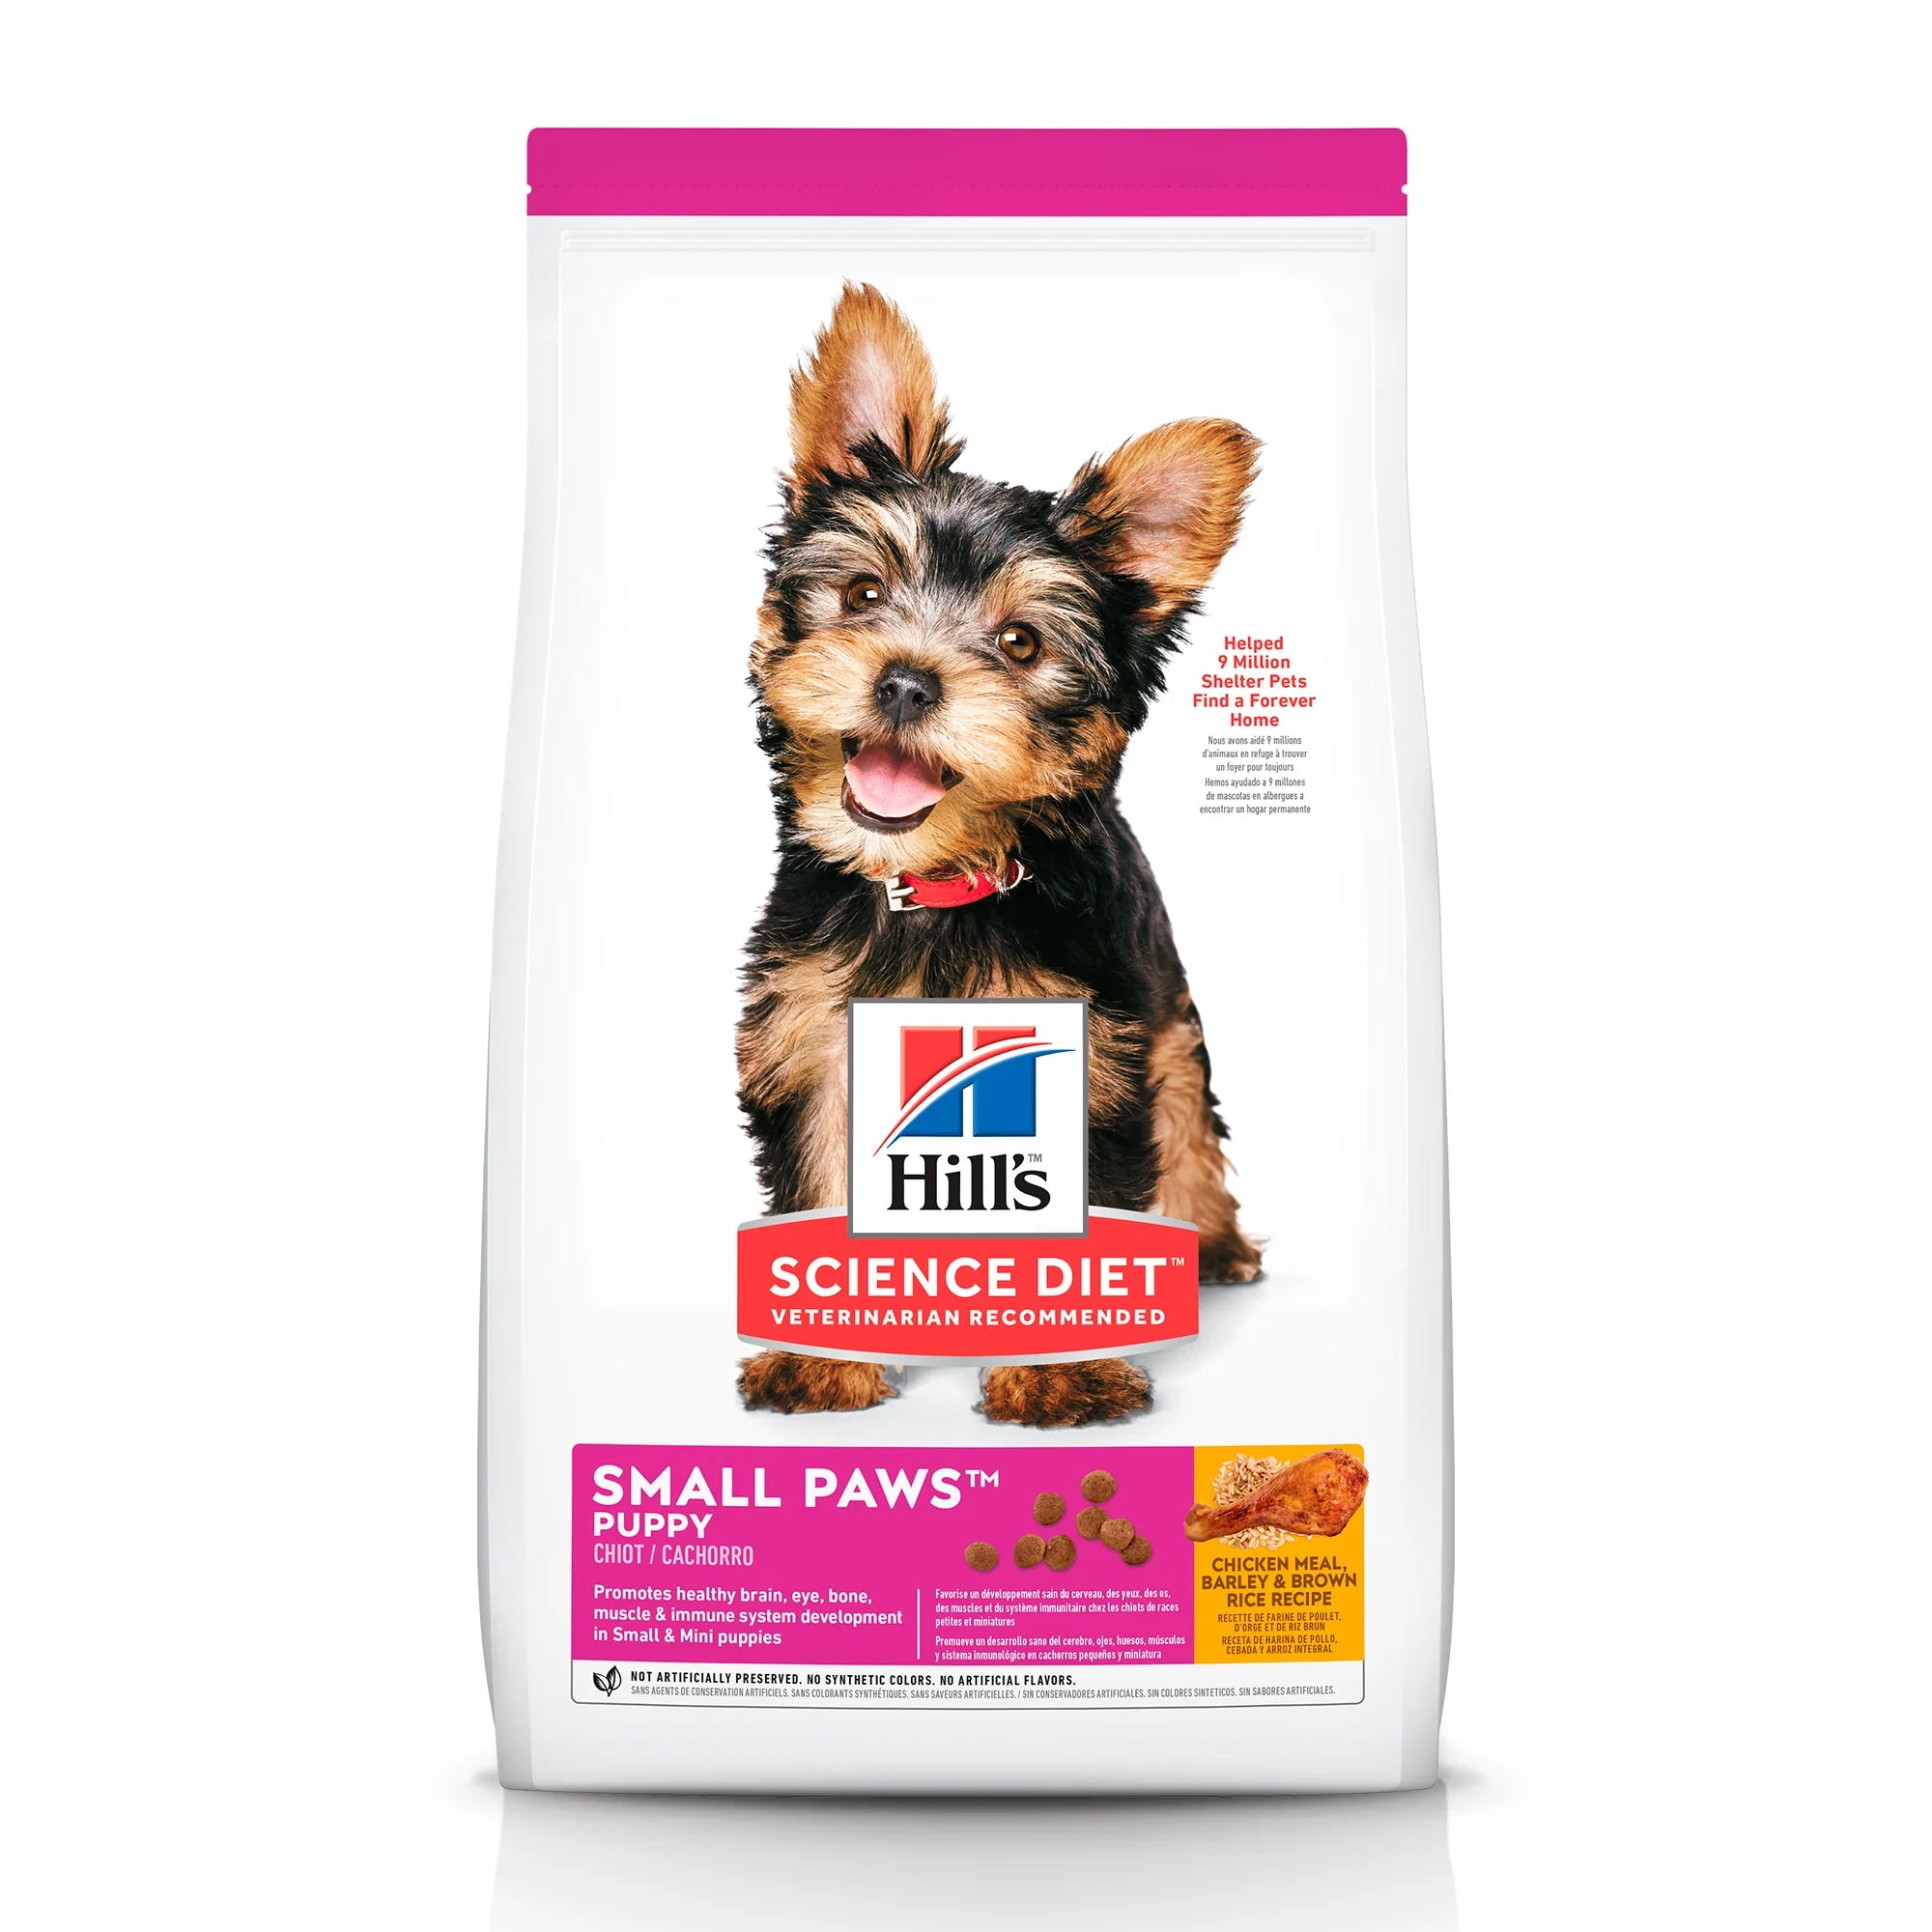 CANINO HILL'S PUPPY SMALL PAWS 4.5 LB